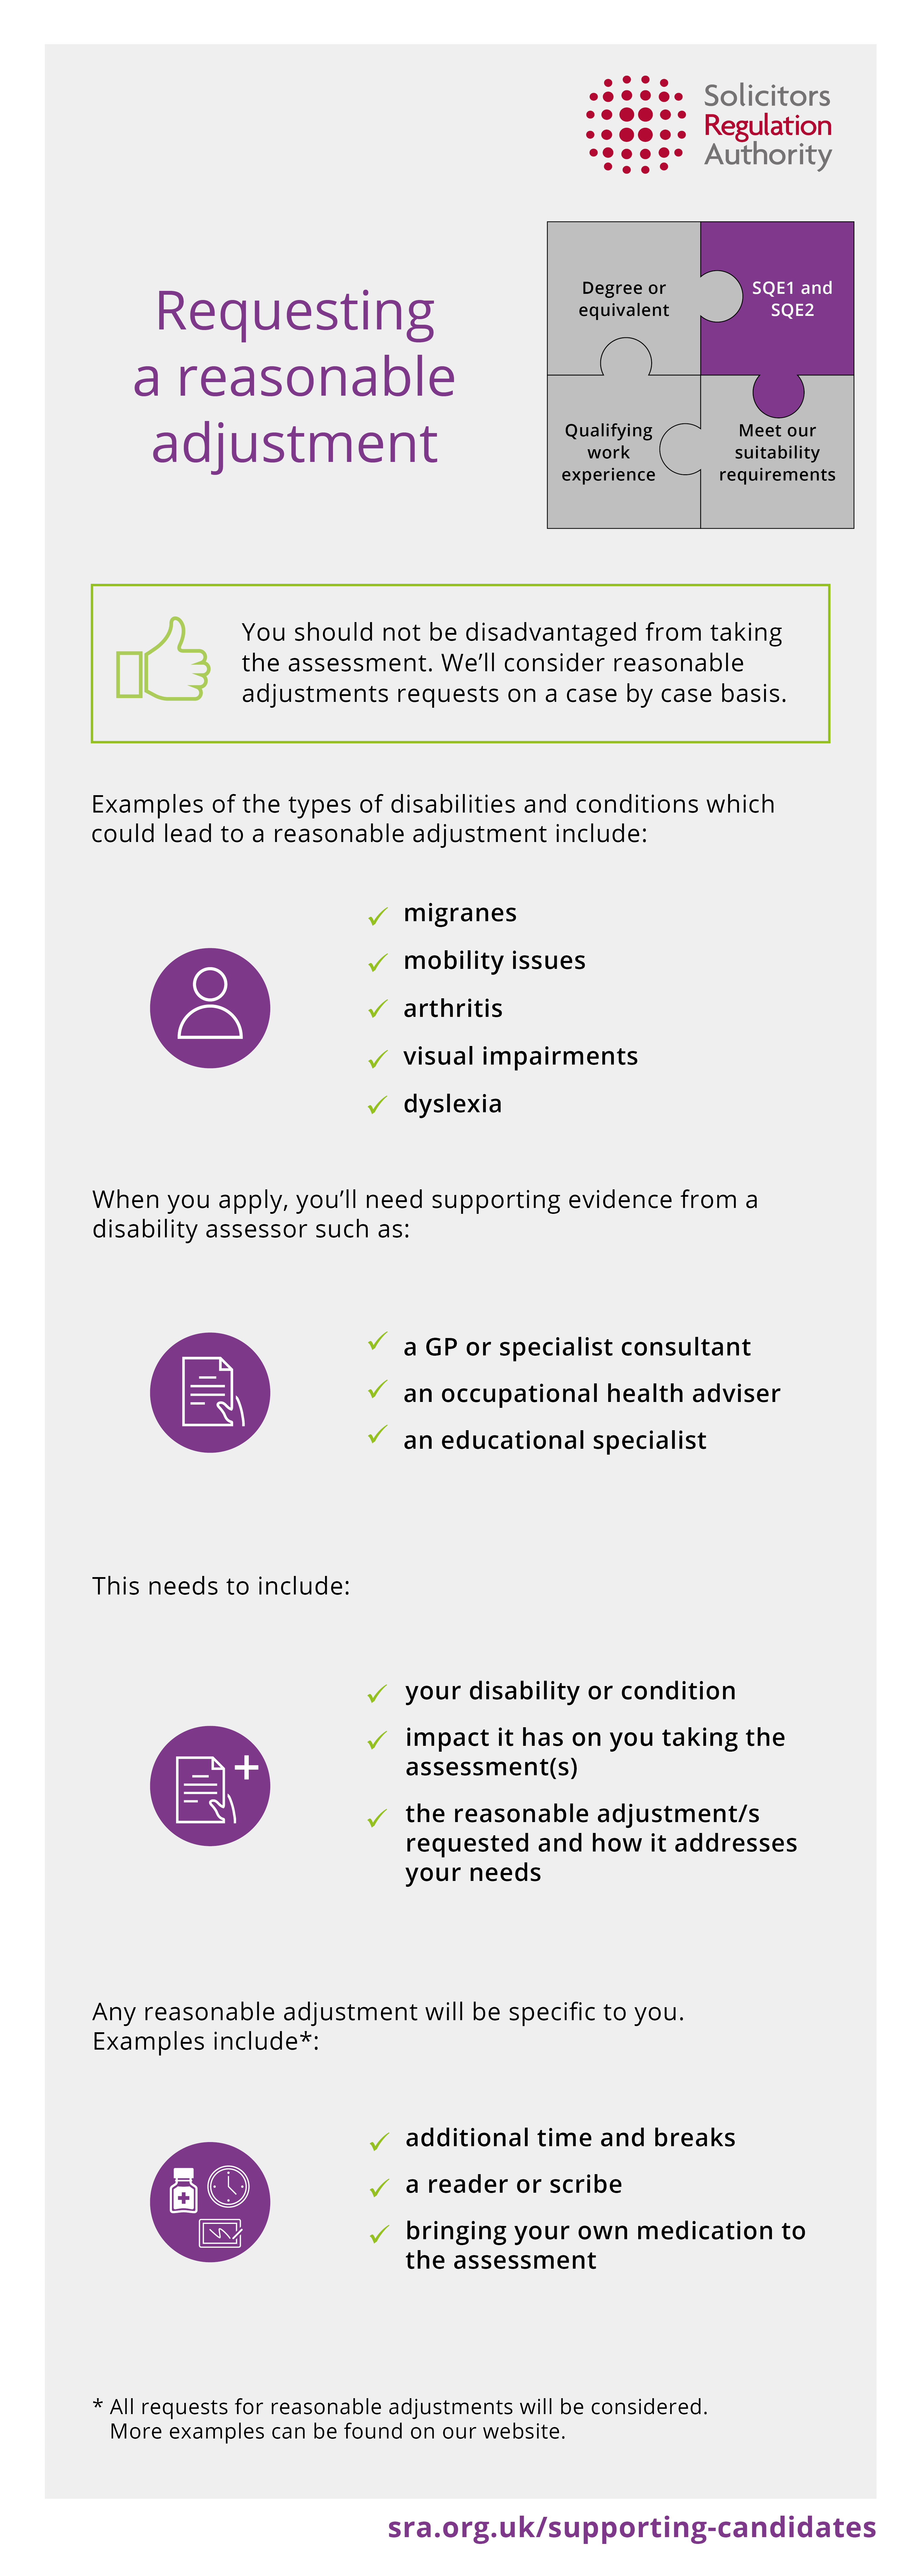 
You should not be disadvantaged from taking the assessment. We’ll consider reasonable adjustments requests on a case by case basis. Examples of the types of disabilities and conditions which could lead to a reasonable adjustment include migraines, mobility issues, arthritis, visual impairments and dyslexia. When you apply, you’ll need supporting evidence from a disability assessor such as a GP or specialist consultant, occupational health adviser and an educational specialist. This needs to include your disability or condition impact it has on you taking the assessment(s) and the reasonable adjustment/s requested & how it addresses your needs. Any reasonable adjustment will be specific to you. Examples include additional time and breaks, a reader or scribe and bringing your own medication to the assessment.